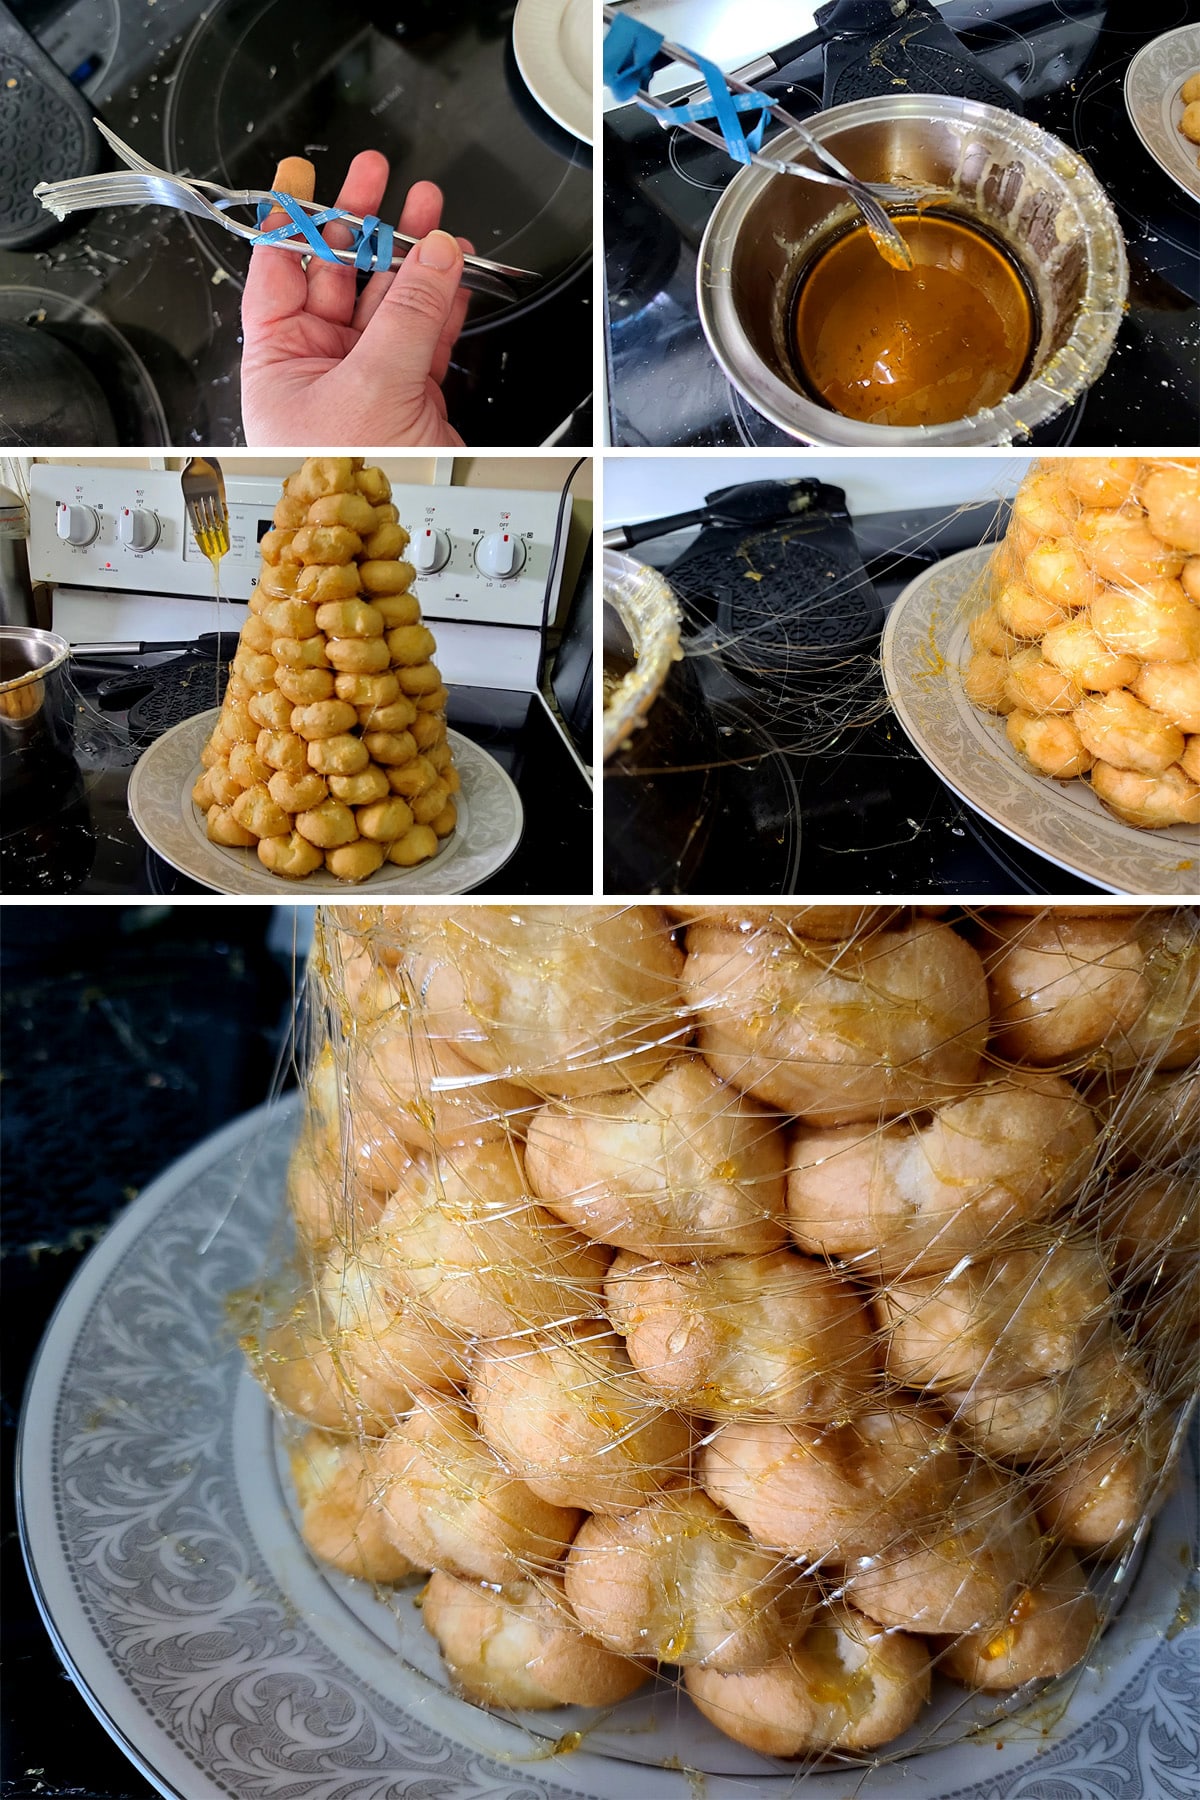 A 5 part image showing forks being tied together and used to drizzle a web of sugar around a croquembouche.